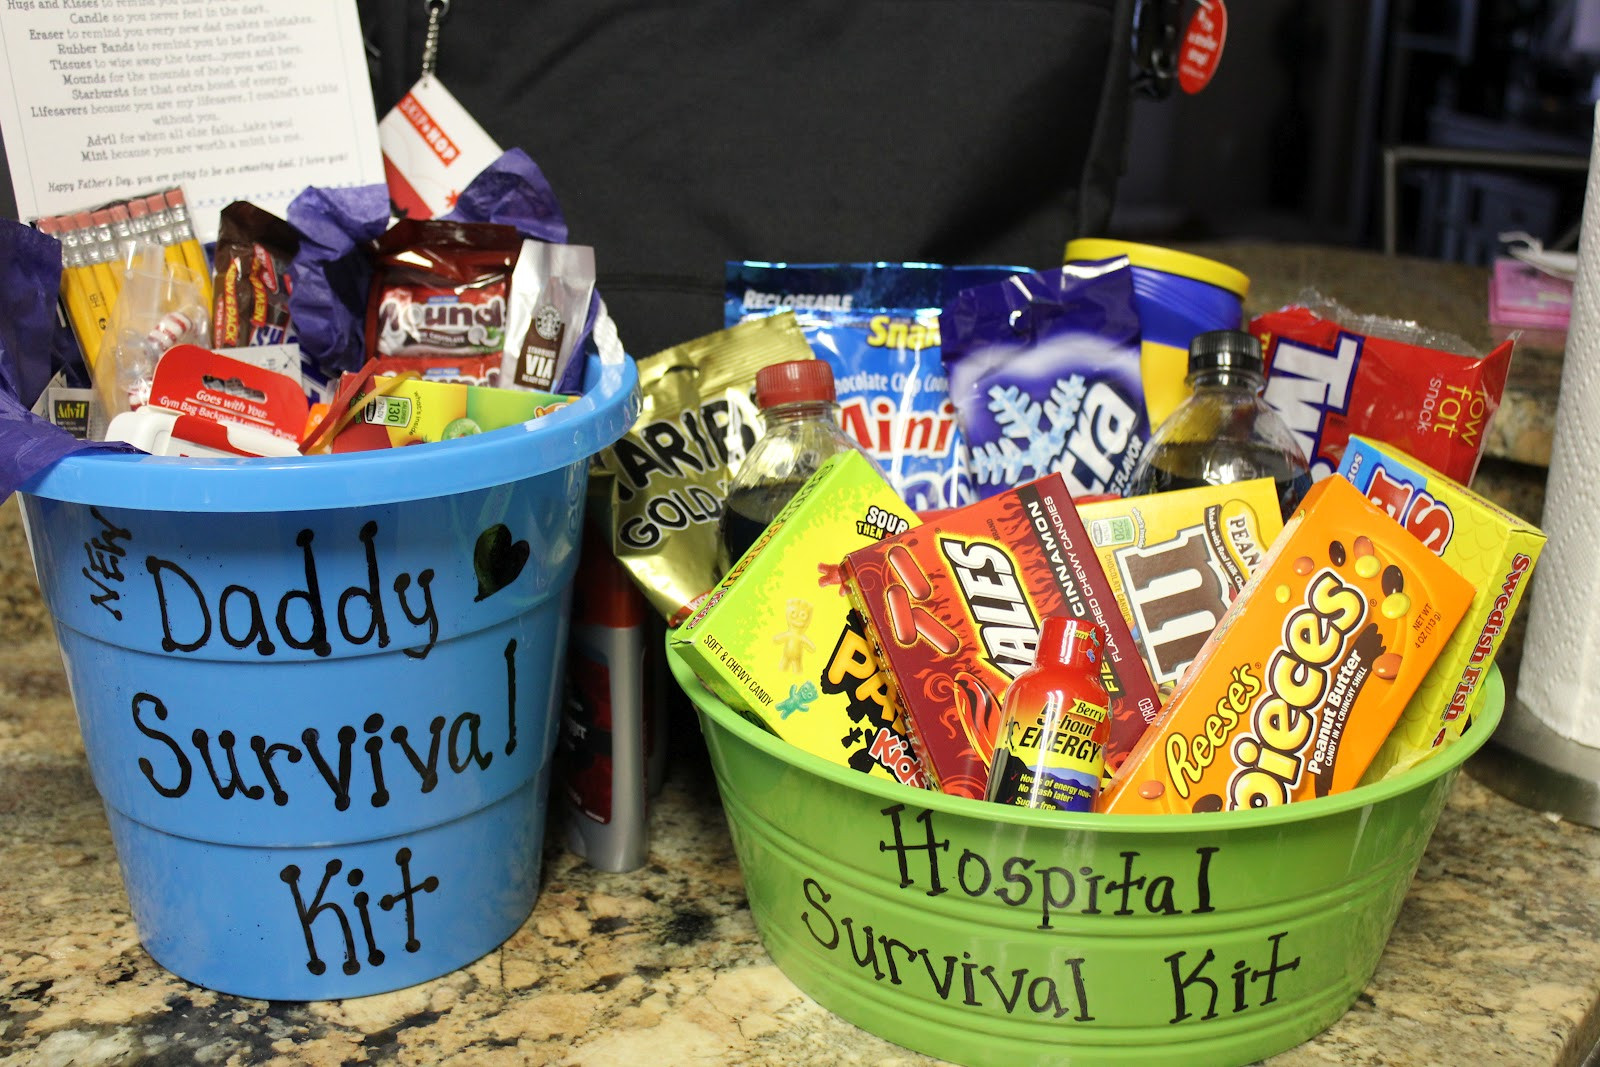 New Dad Gift Basket Ideas
 simply made with love Daddy Survival Kit & Hospital